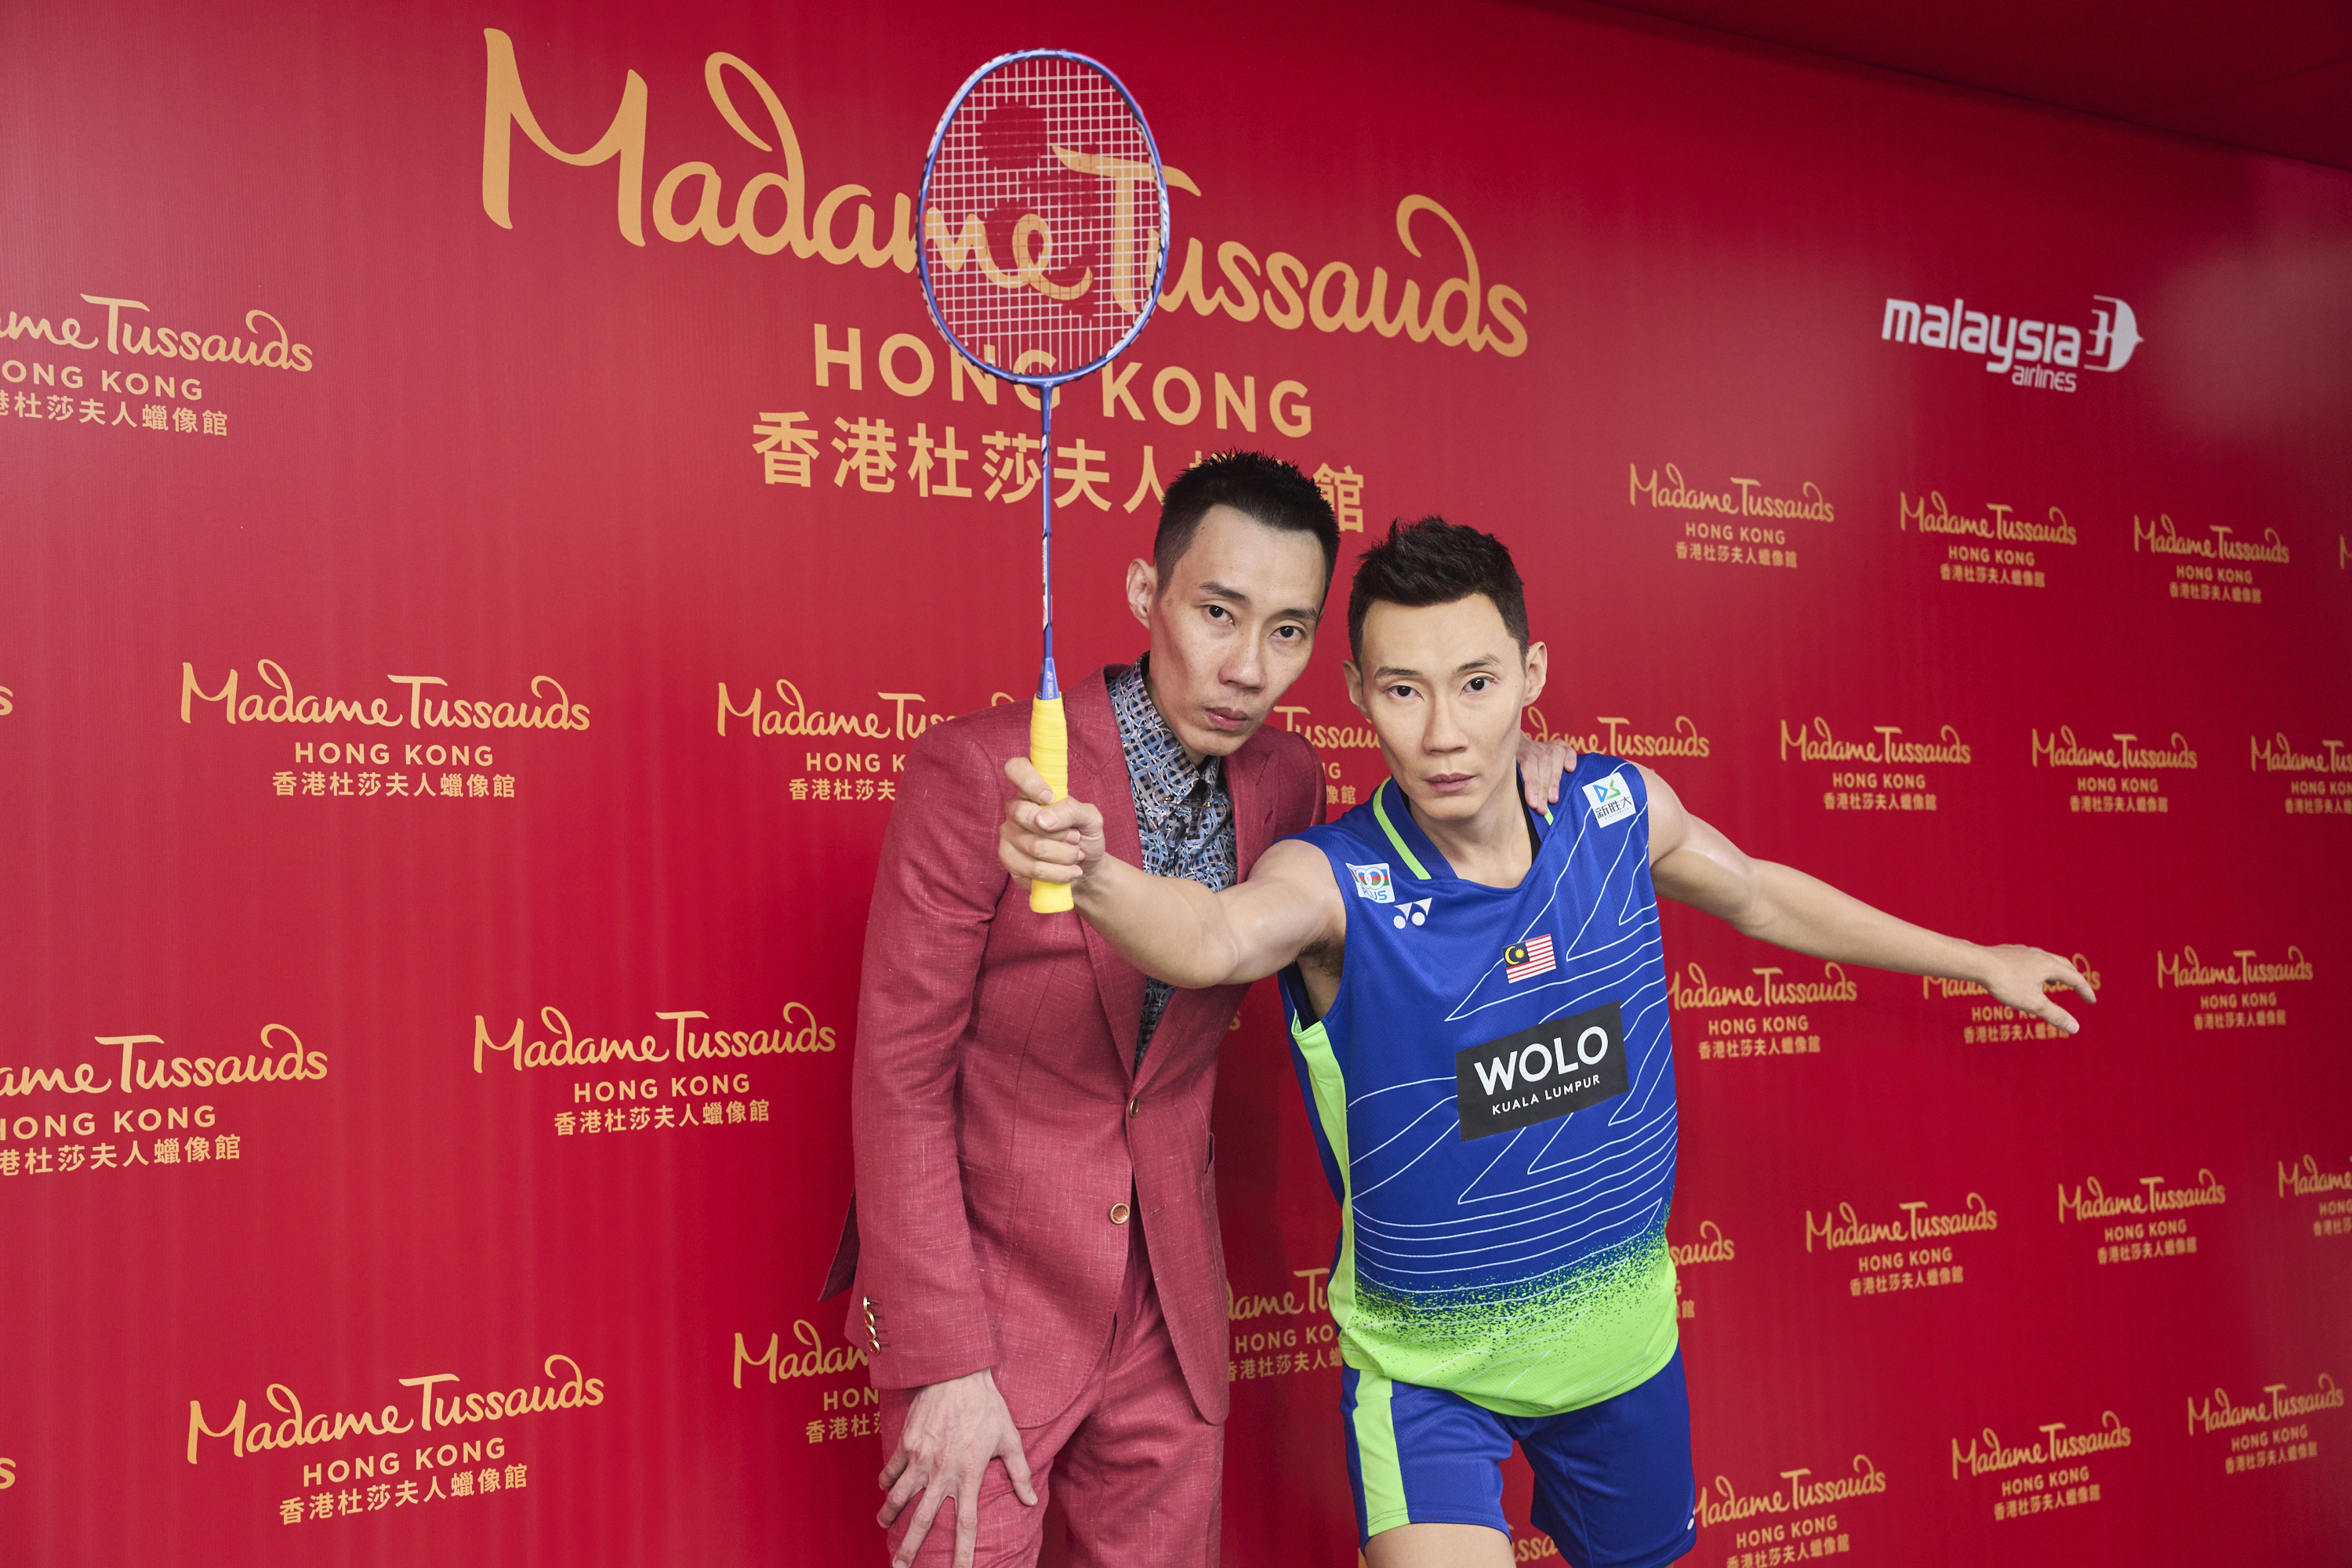 Lee Chong Wei, a champion badminton player, posed next to his wax figure in Madame Tussauds Hong Kong